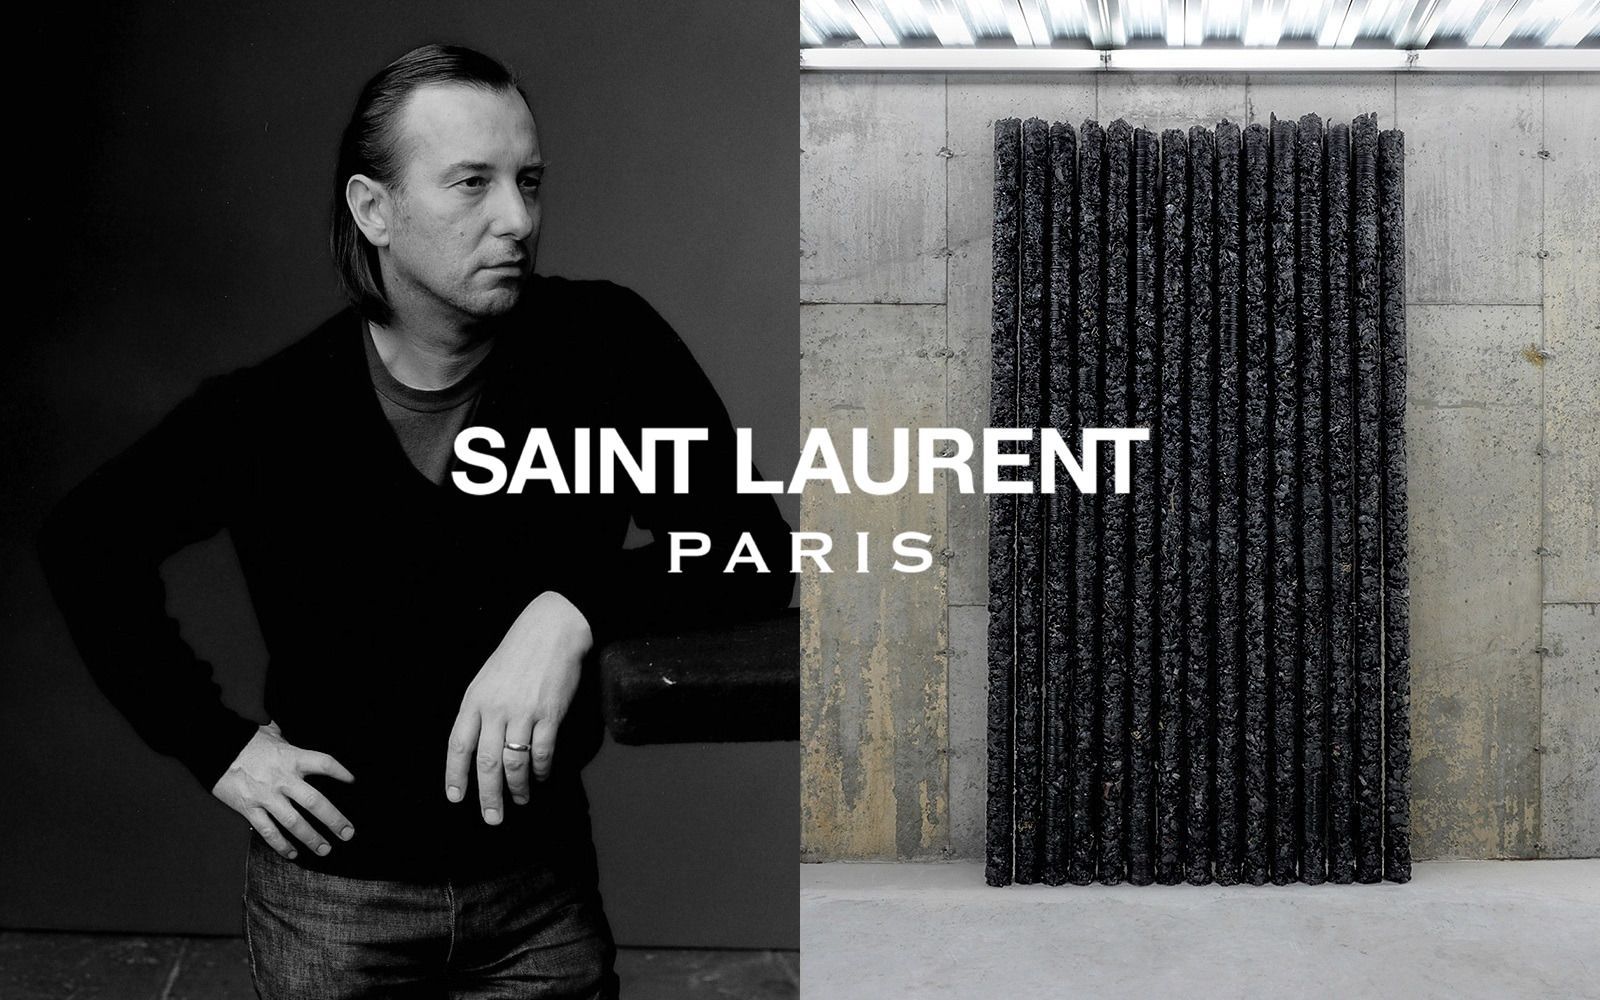 Curations: Saint Laurent allows Helmut Lang to shred its creations for the  sake of art and environment